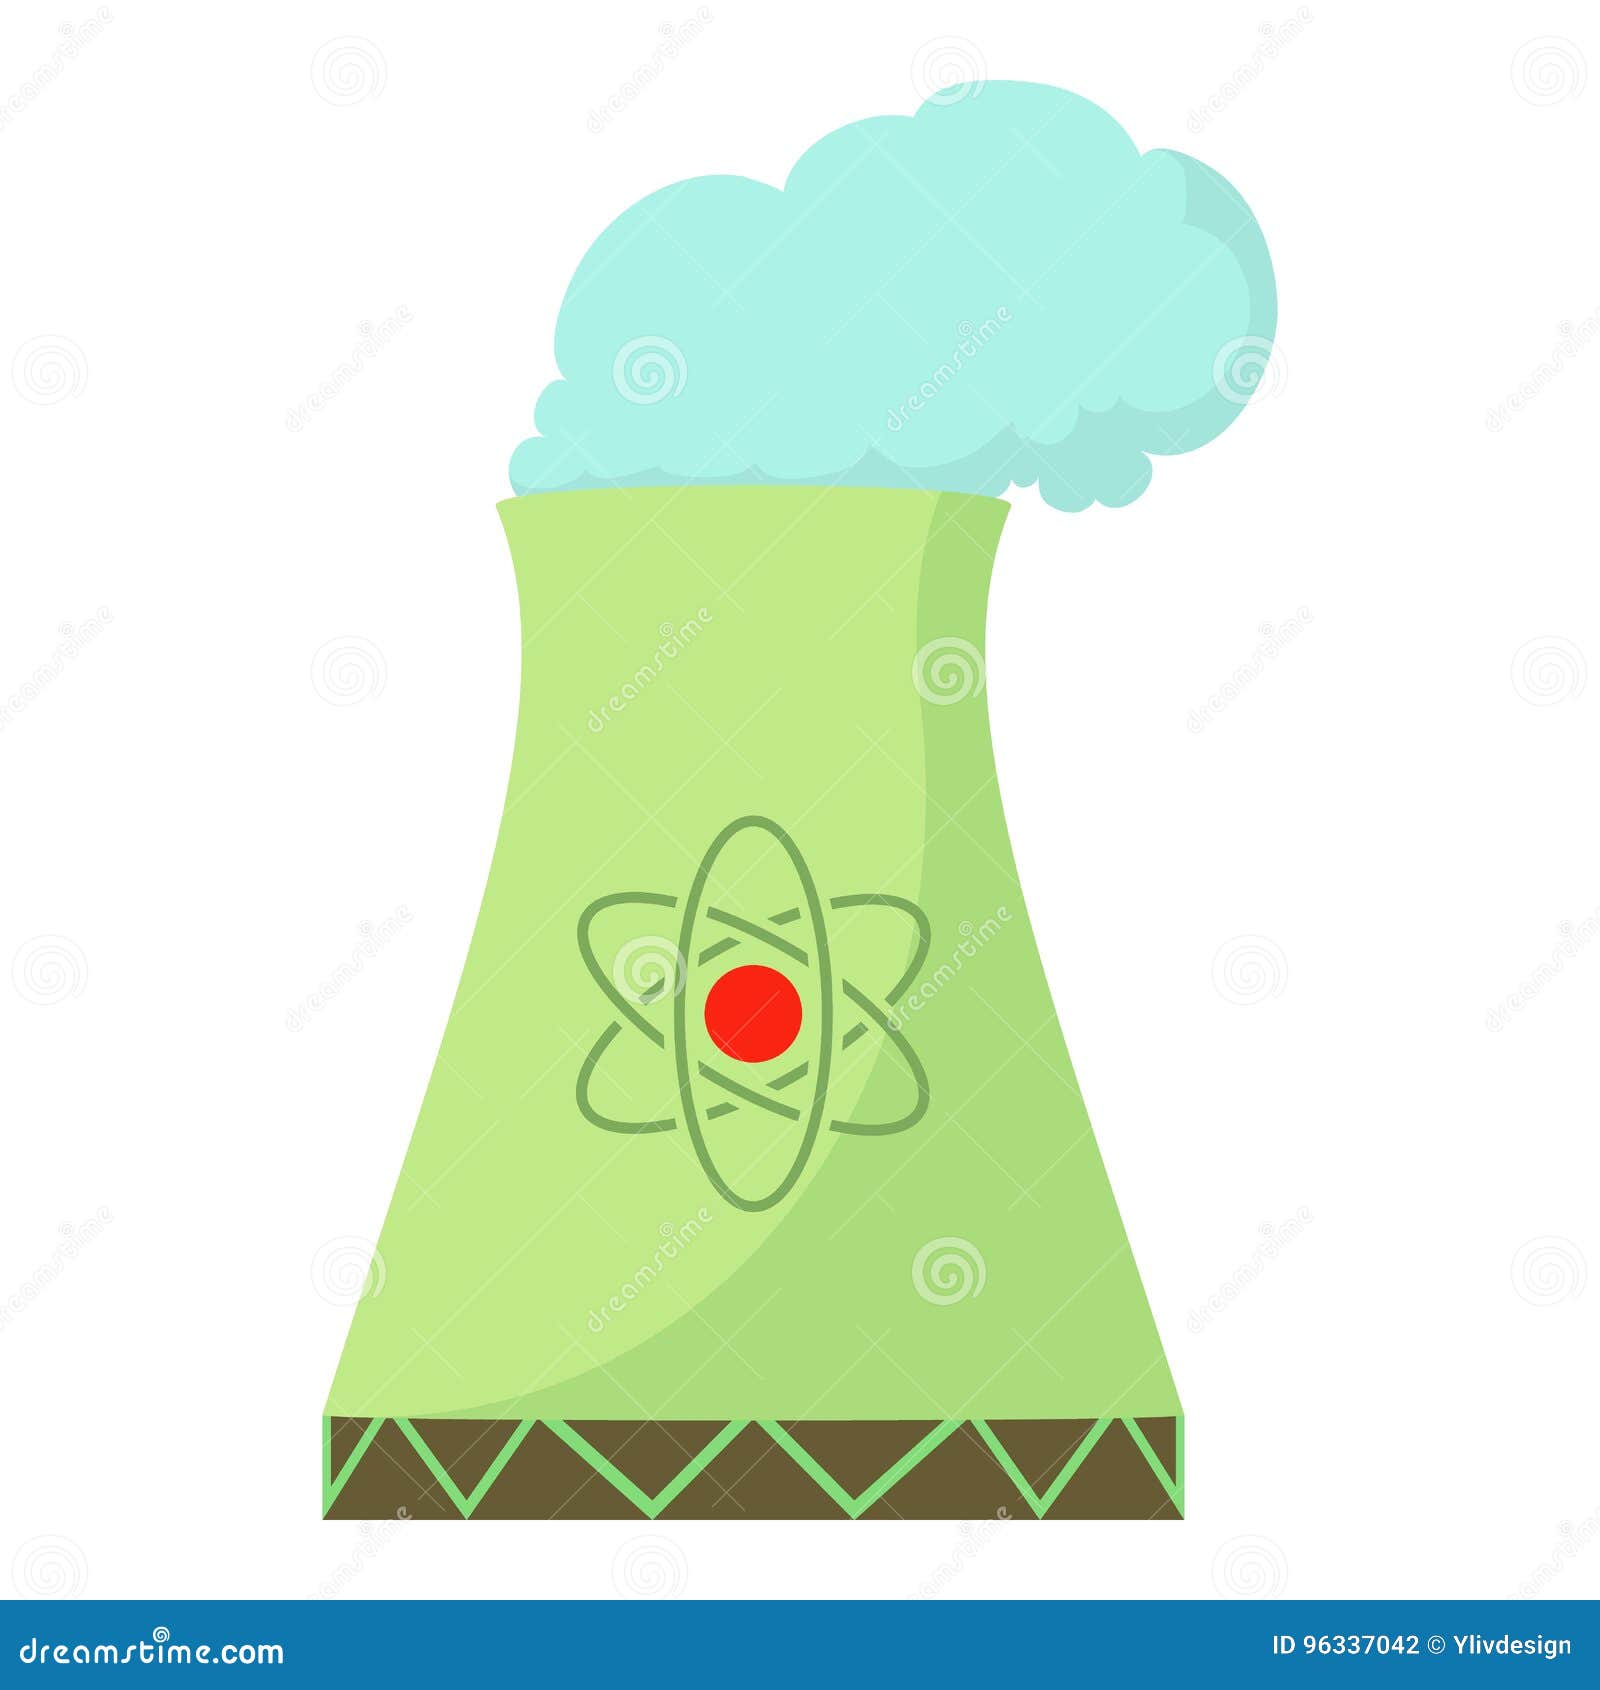 Nuclear Power Plant Icon, Cartoon Style Stock Vector - Illustration of  construction, green: 96337042